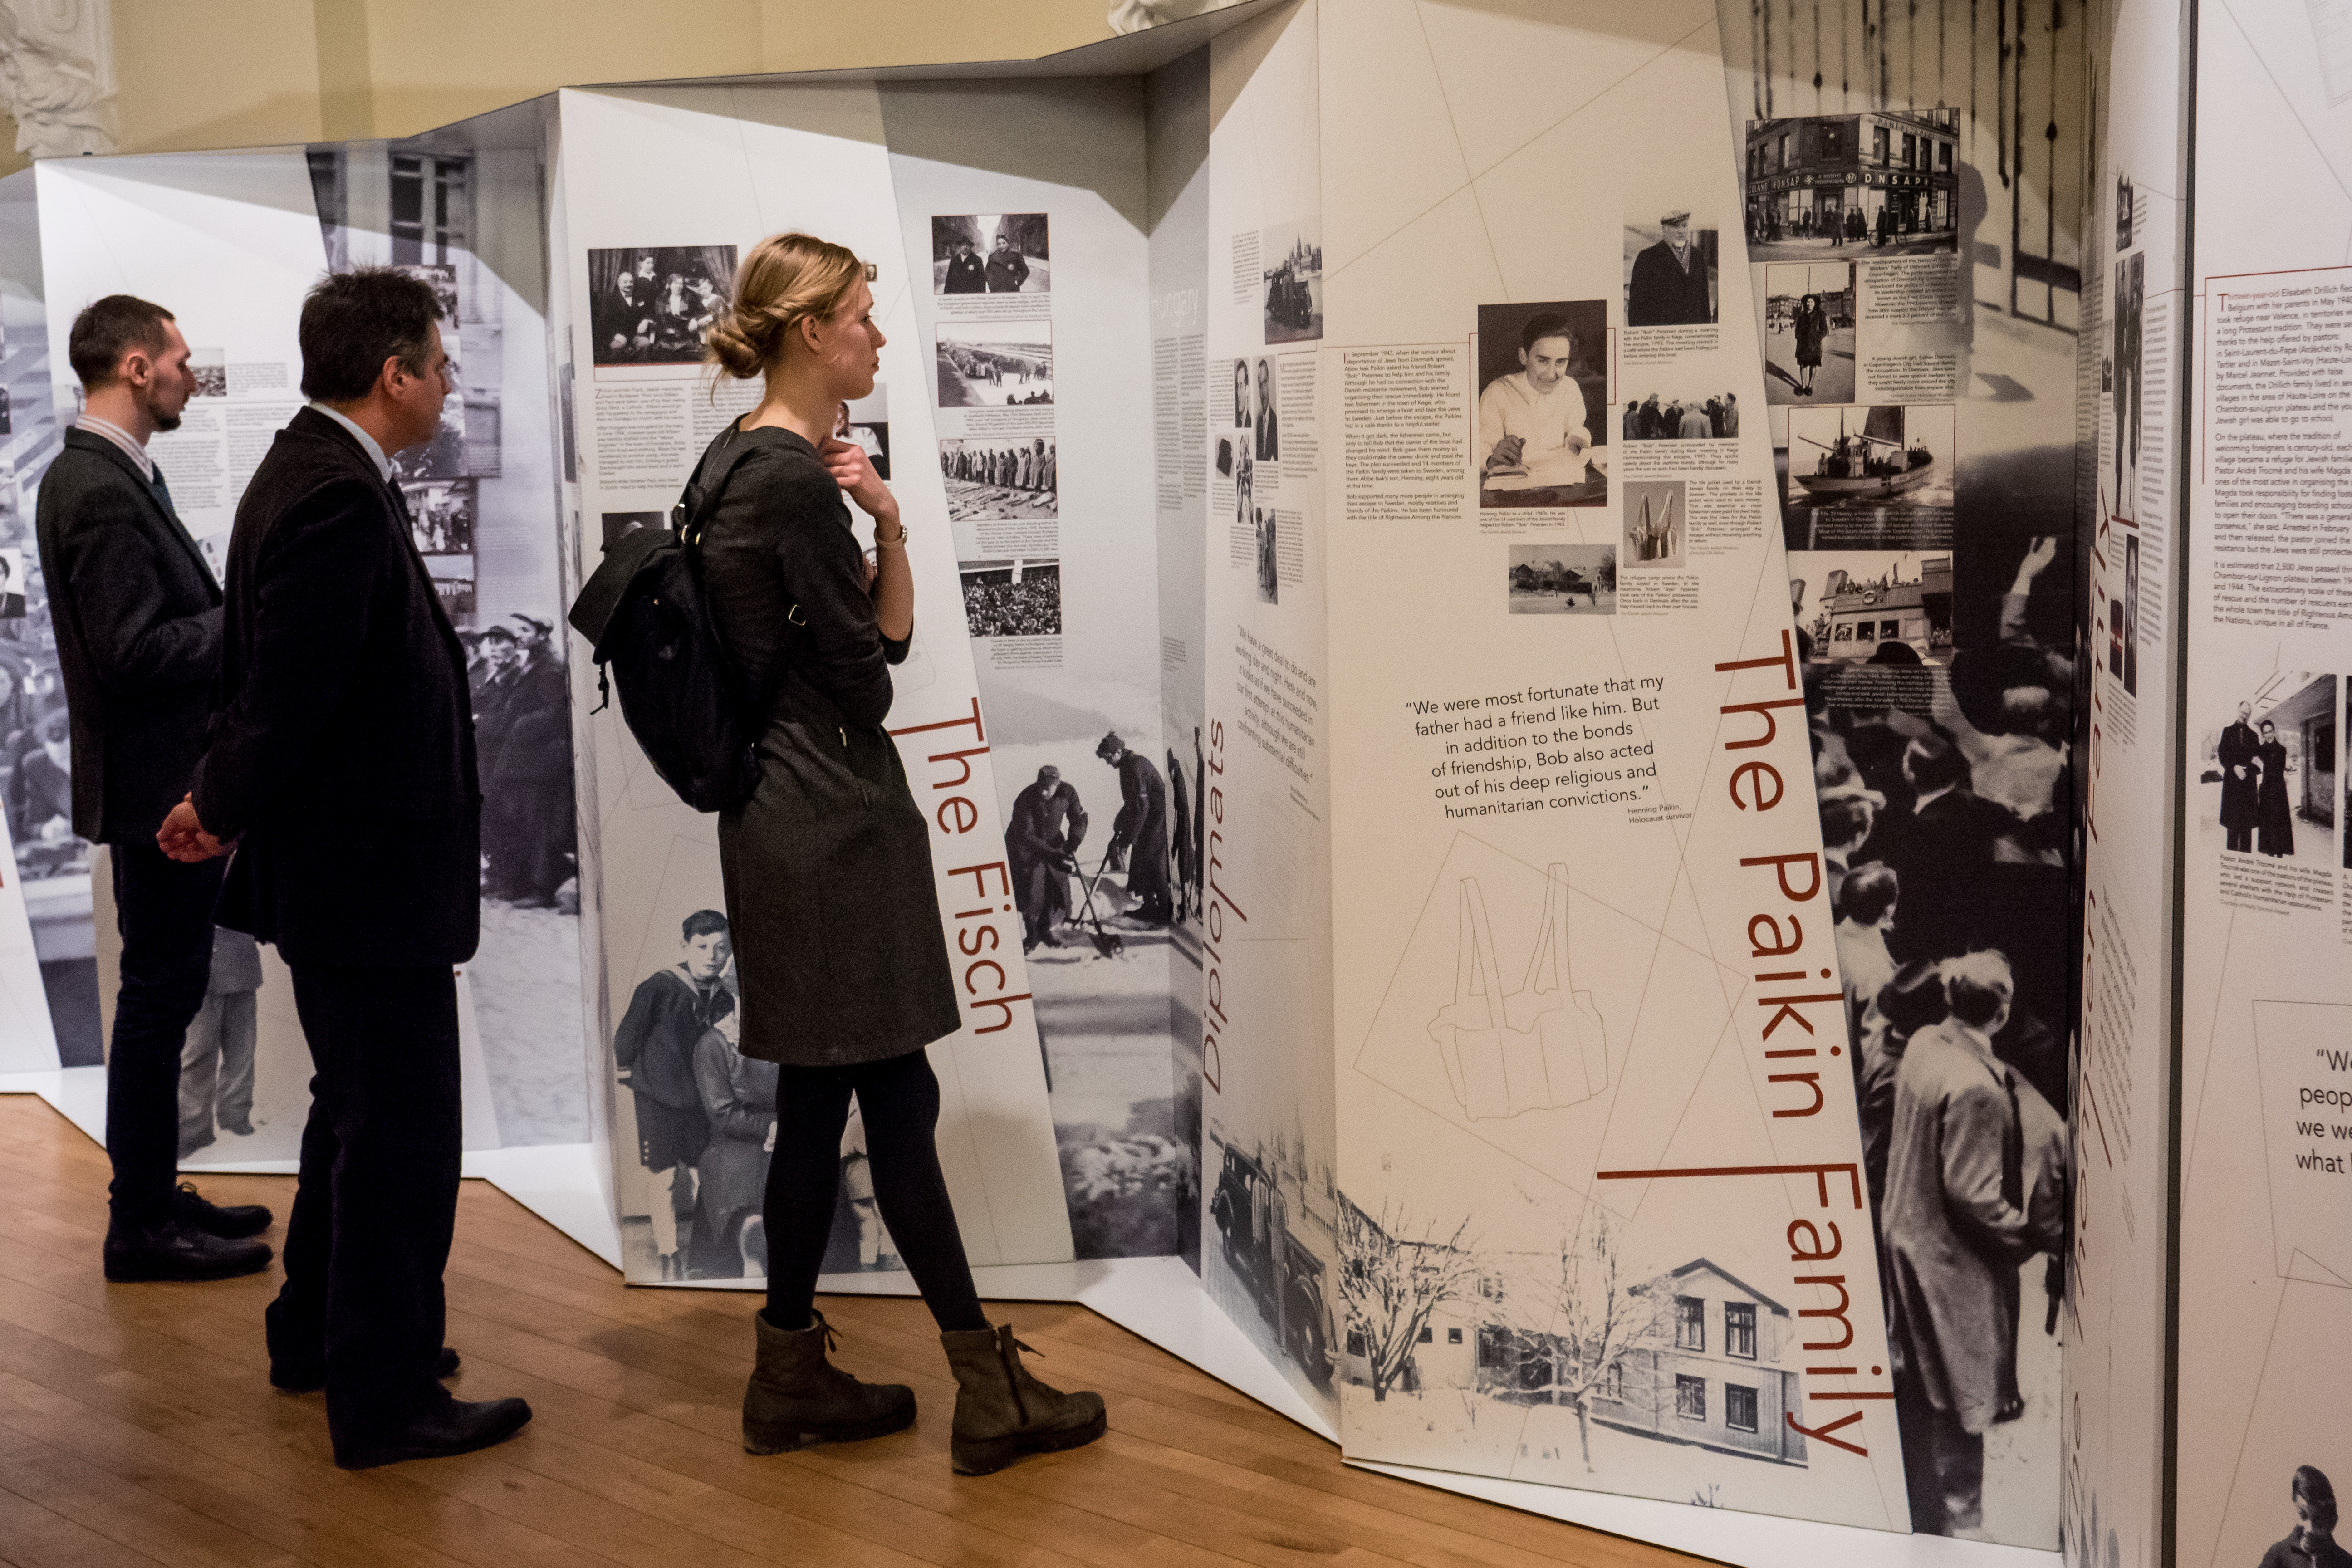 Minister of Culture of Lithuania opens Between Life and Death exhibition